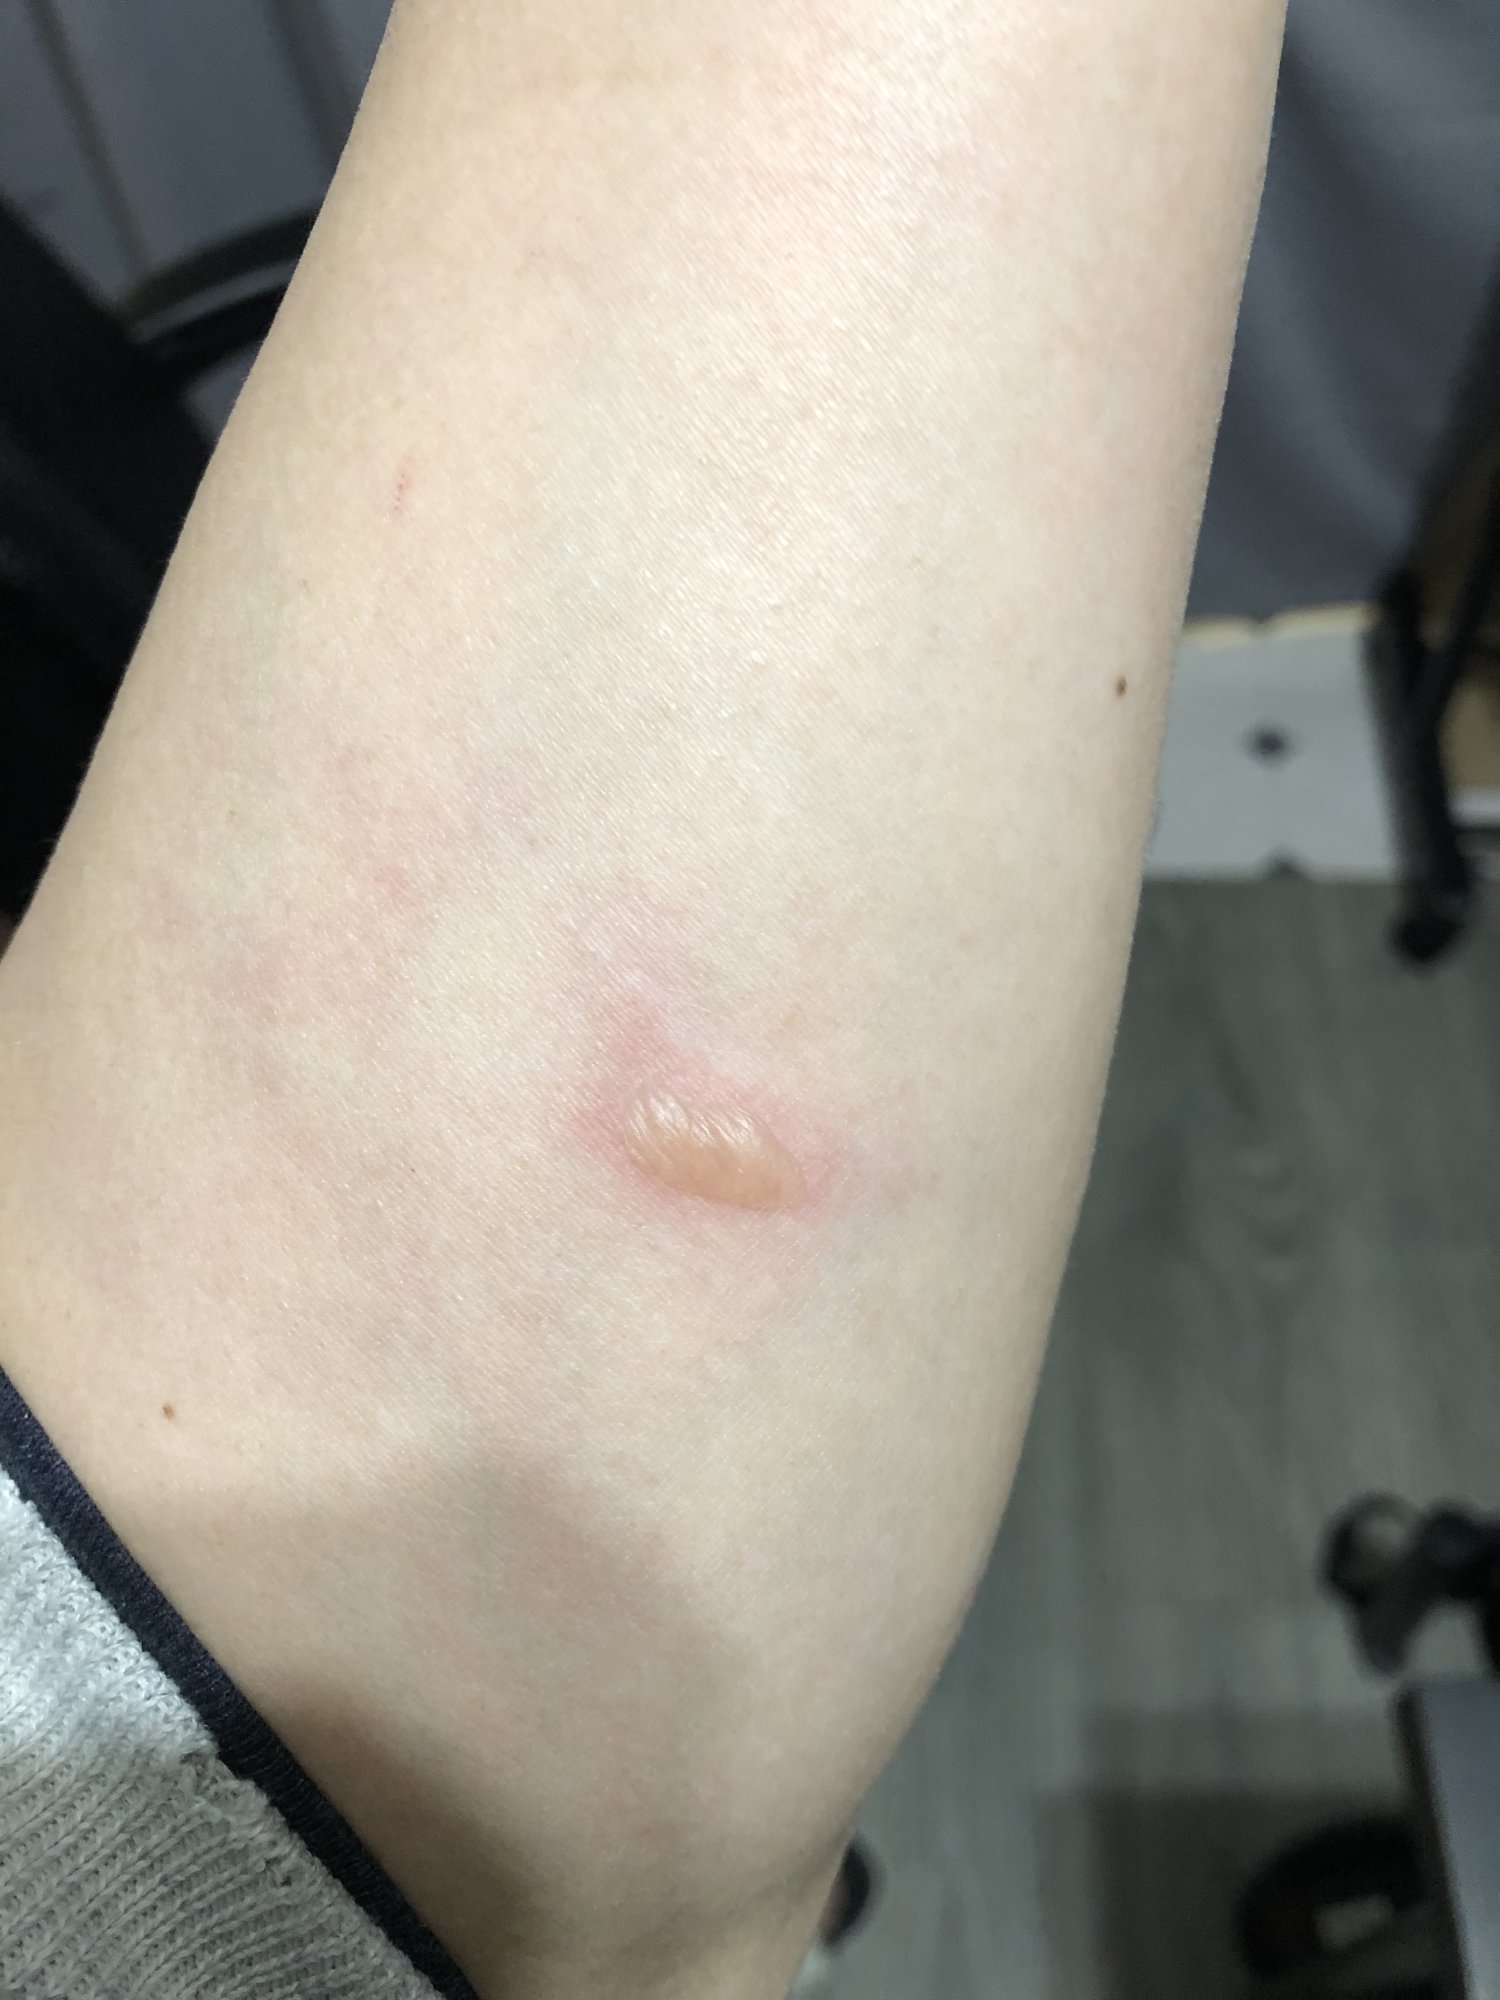 Am i getting allergy or mite bites